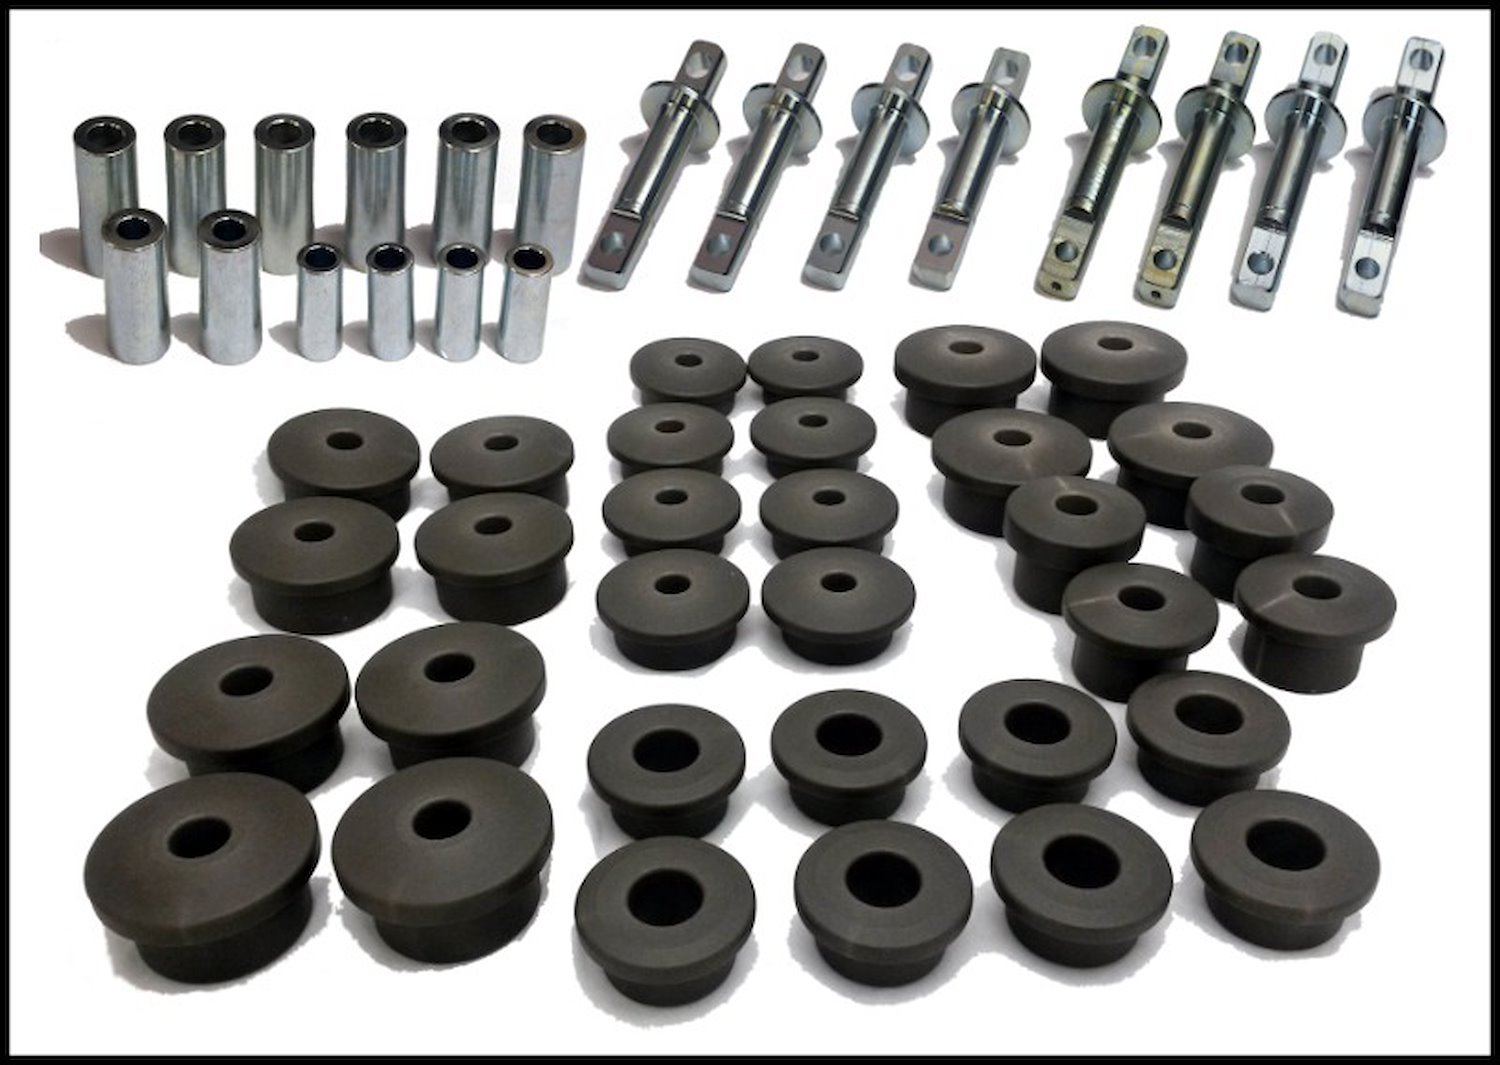 Delrin Control Arm Bushing Kit for 2005-2013 Corvette Z06. Includes front upper and lower Bushings r